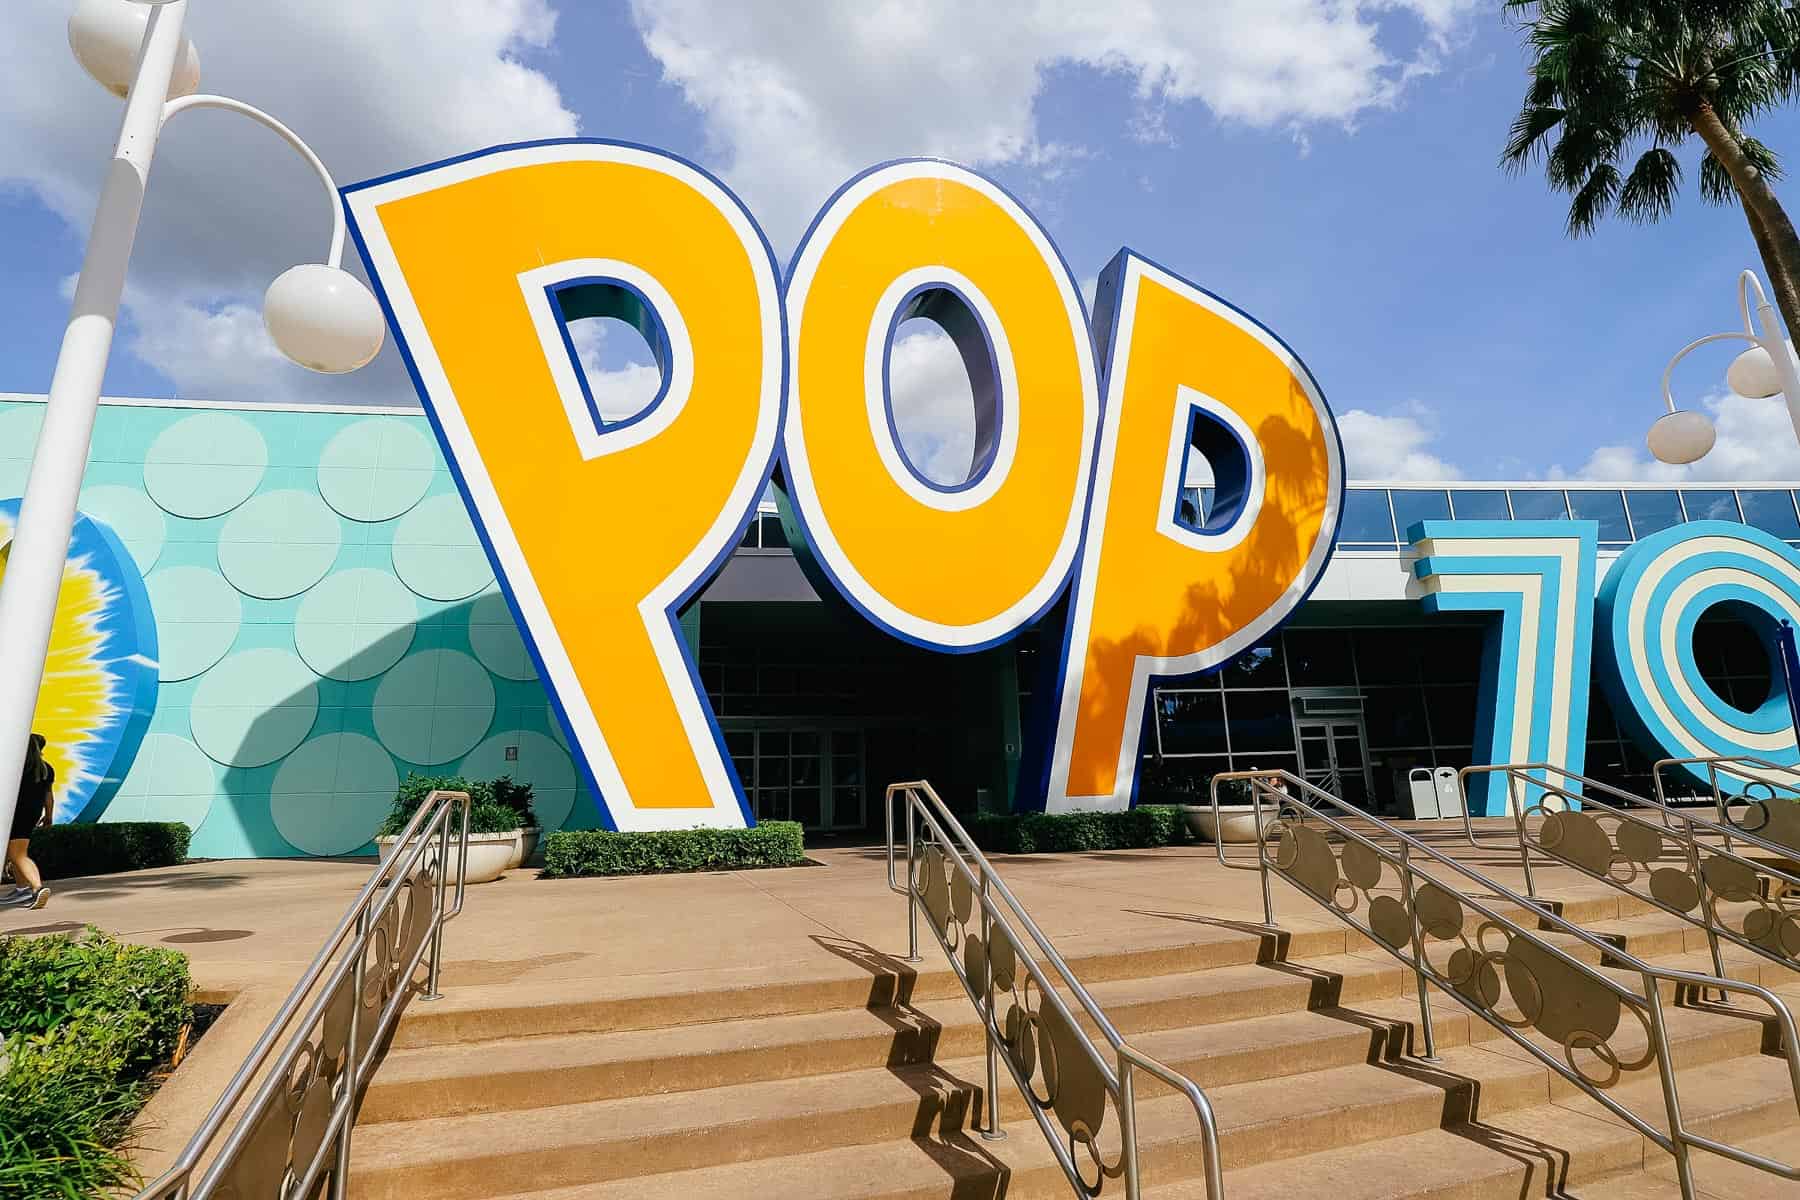 a large yellow sign that spells out pop 